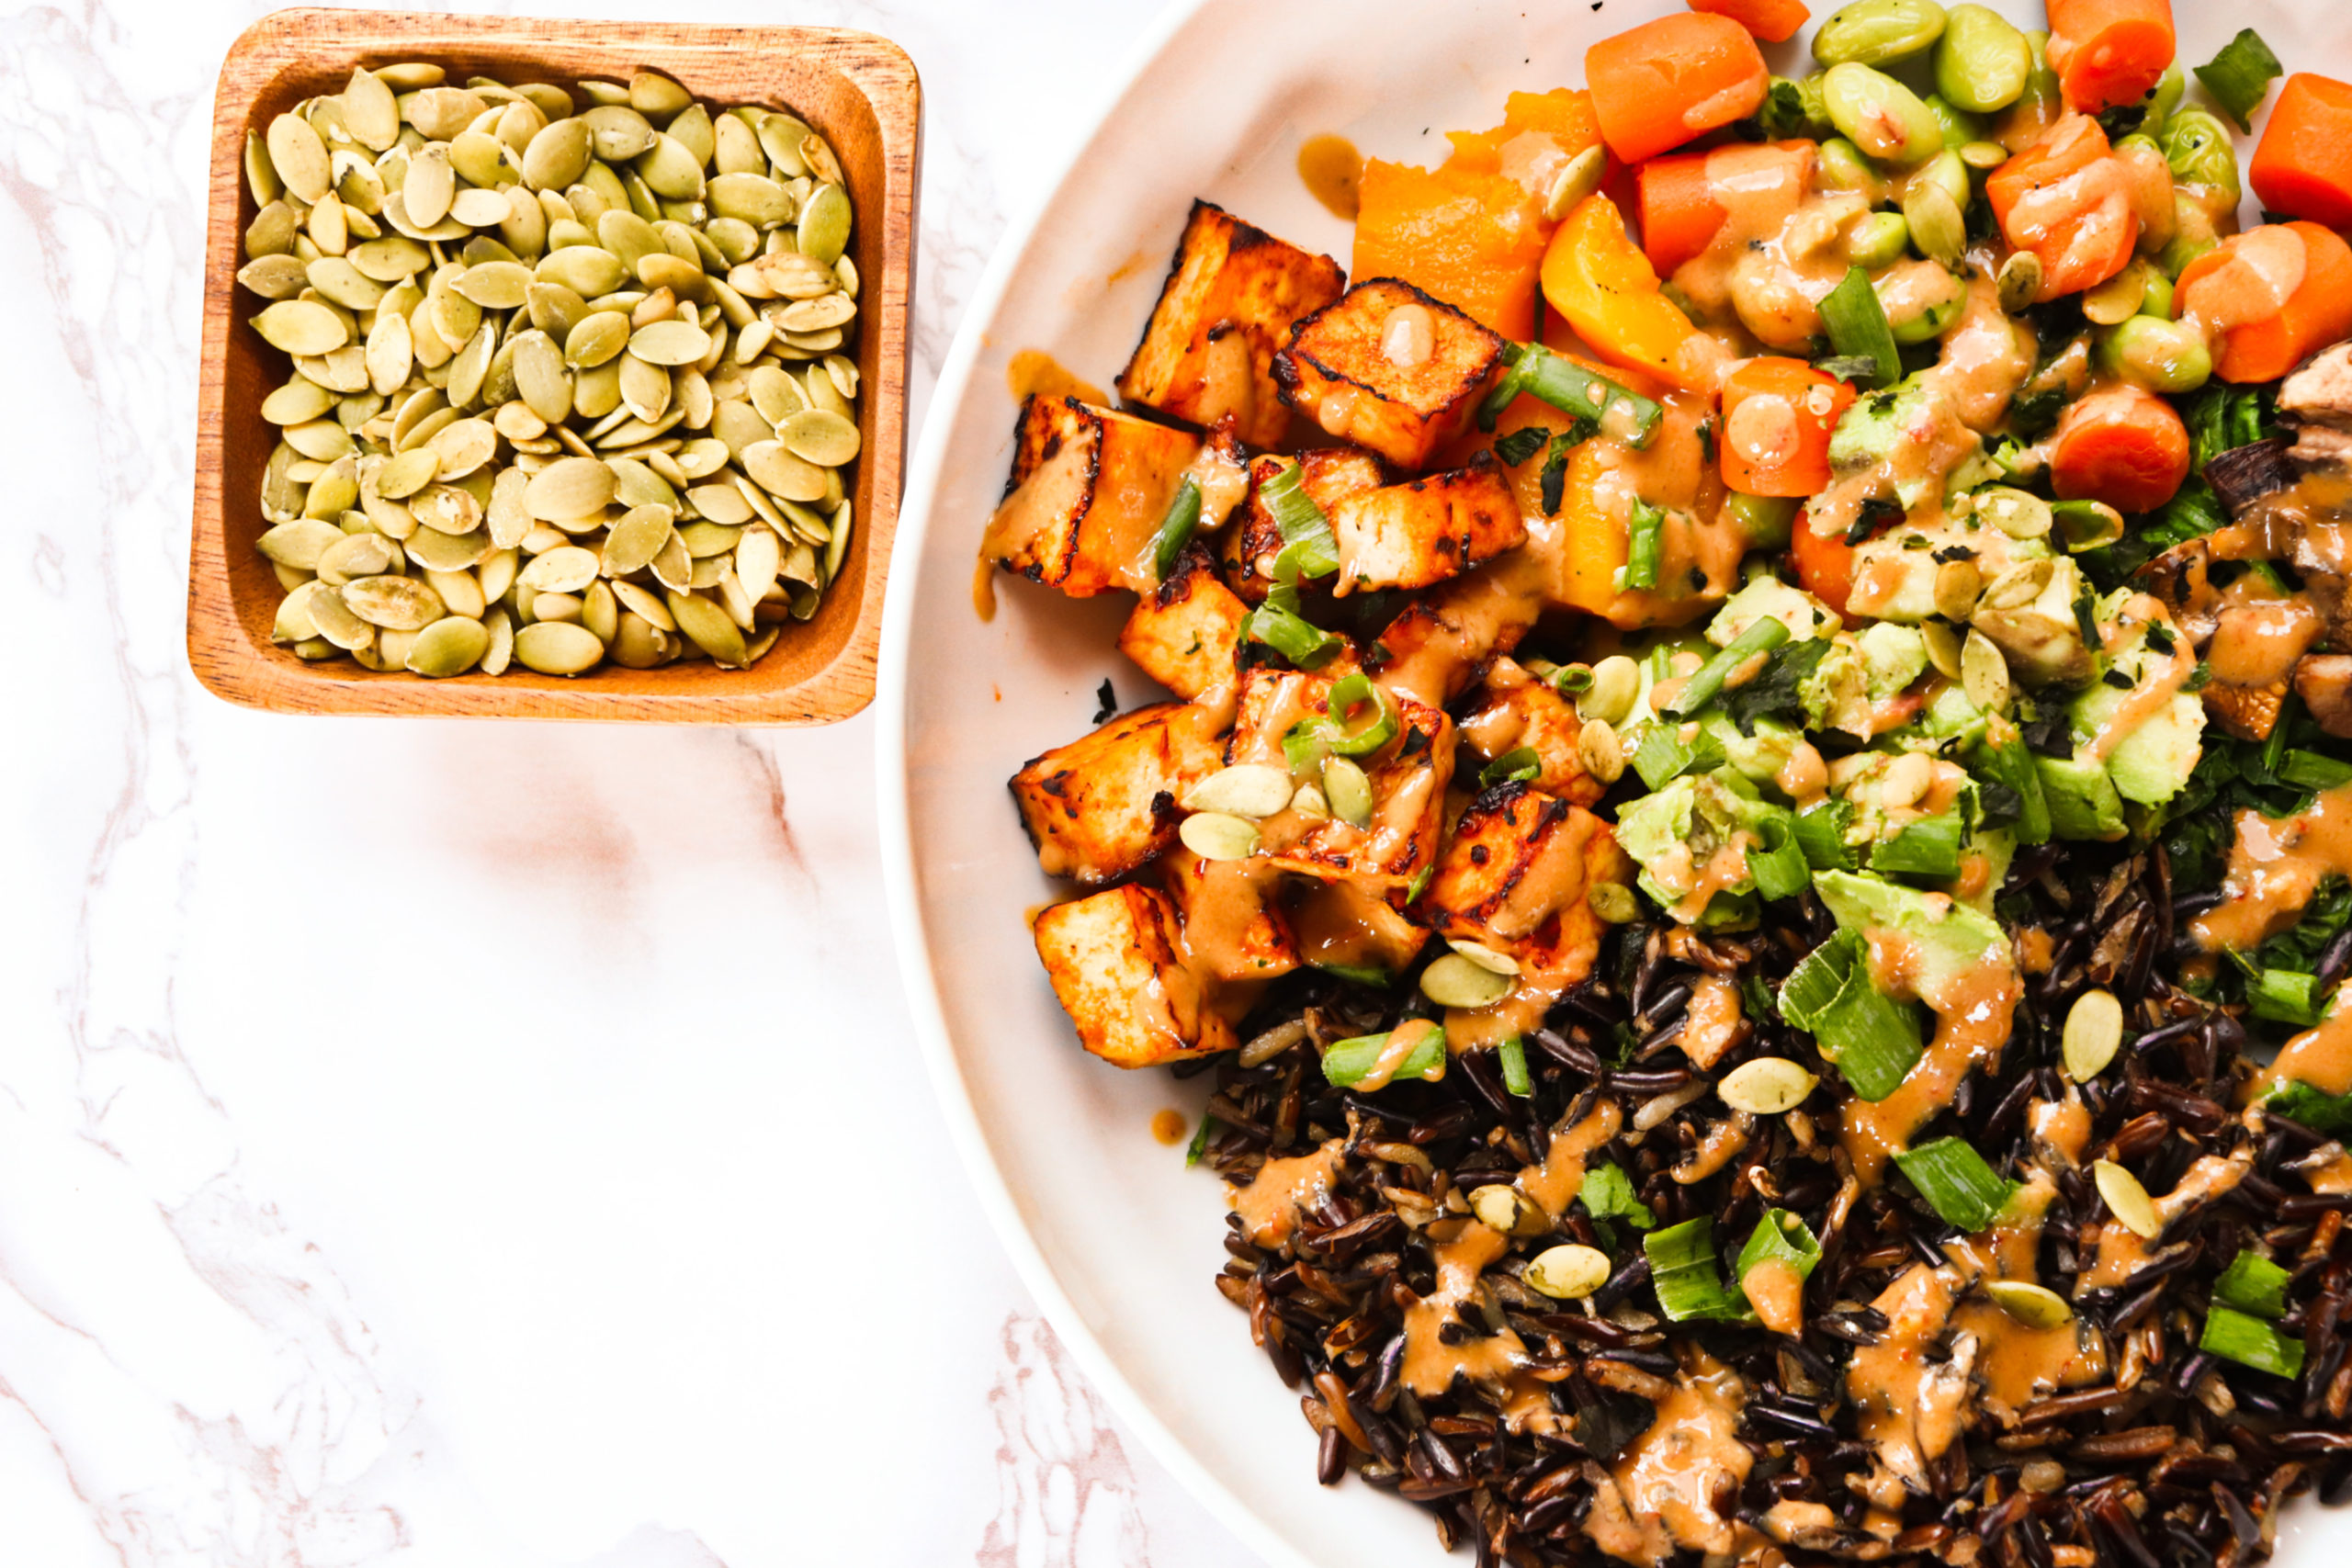 A hearty, protein filled bowl of goodness! This High Protein Mushroom Tofu Bowl is filled with wild rice, mushrooms, tofu, edamame beans, and topped with pumpkin seeds and a miso ginger dressing.